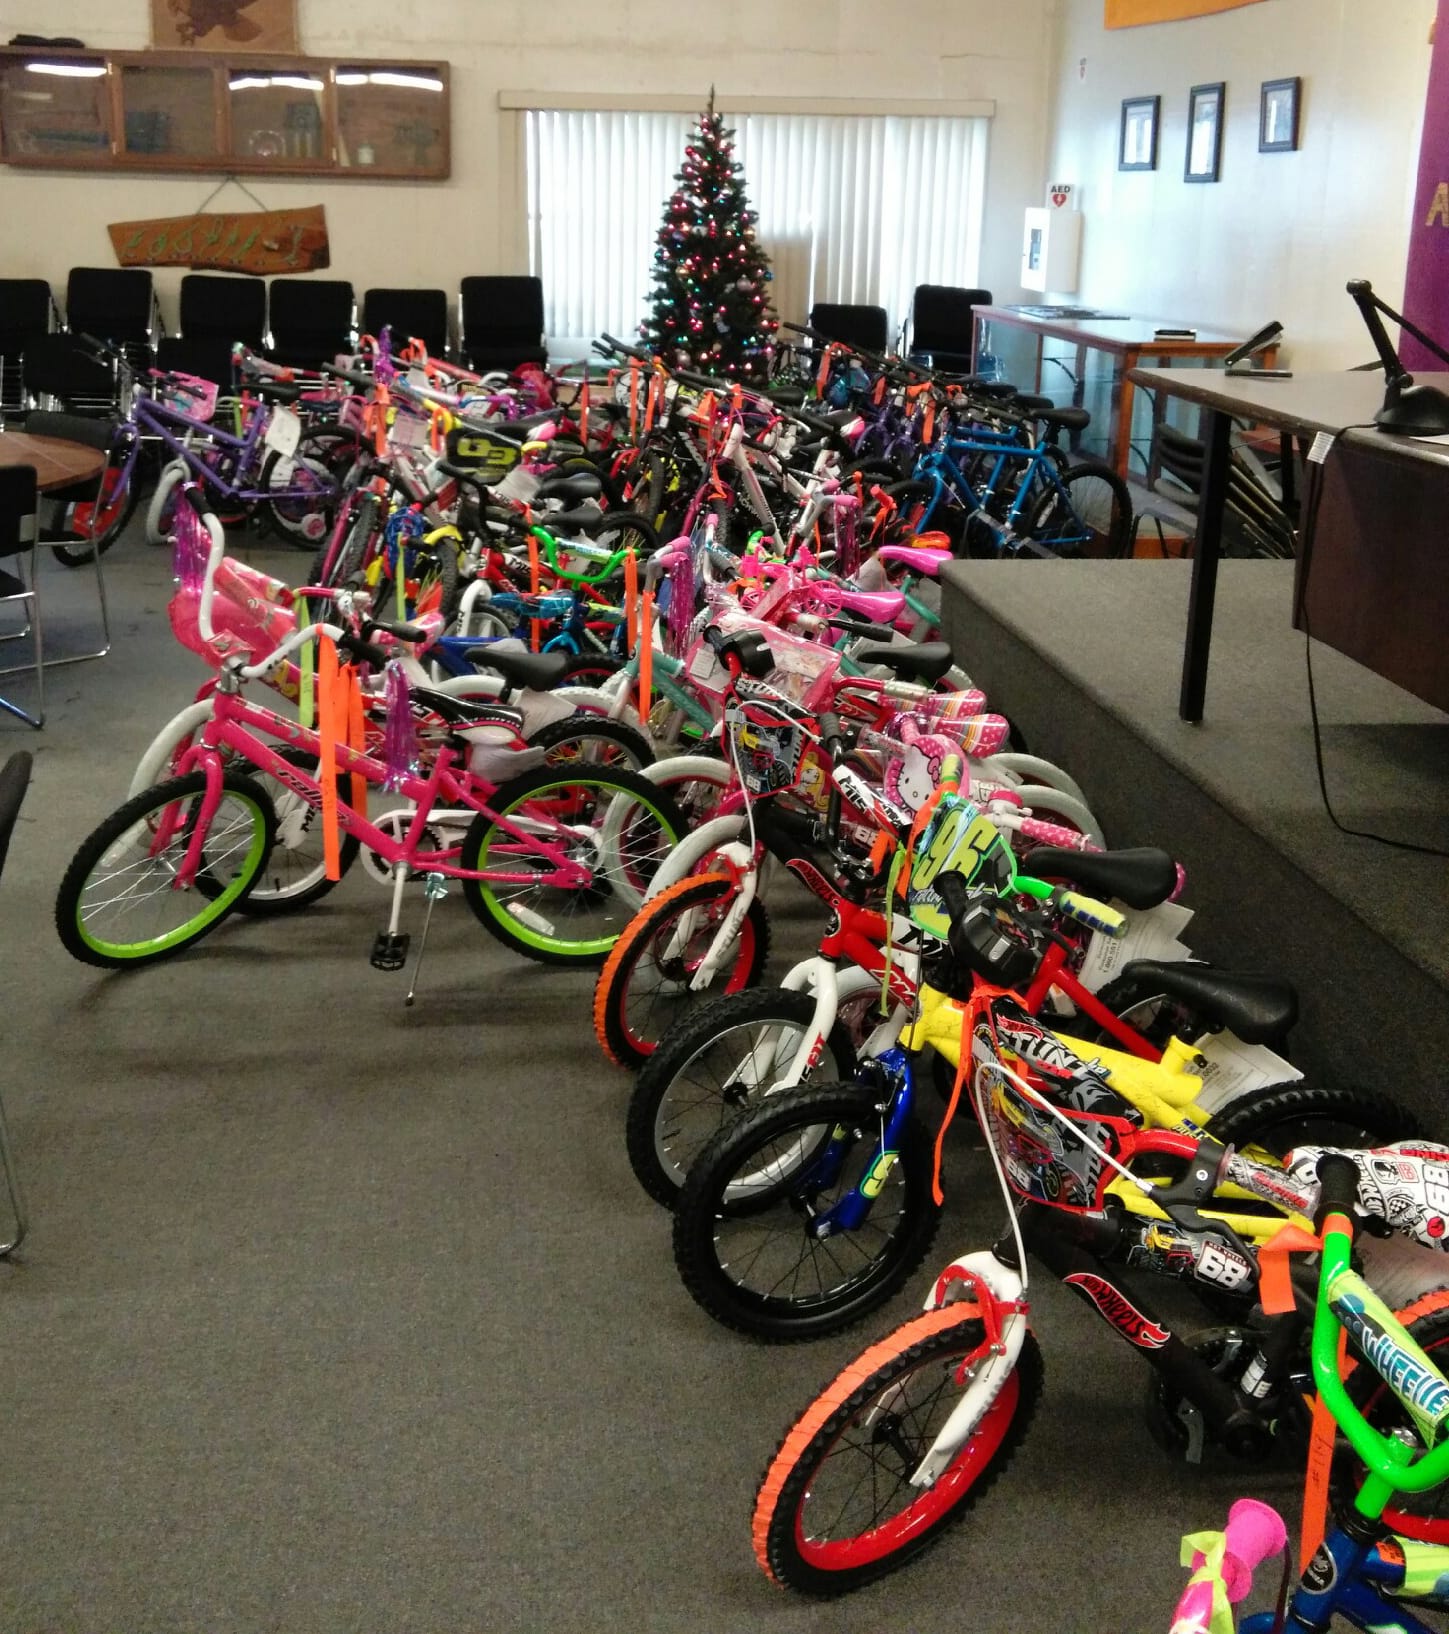 Esther Short: The International Longshore and Warehouse Union Local 4 donated more than 100 bicycles to the Children's Justice Center this season.